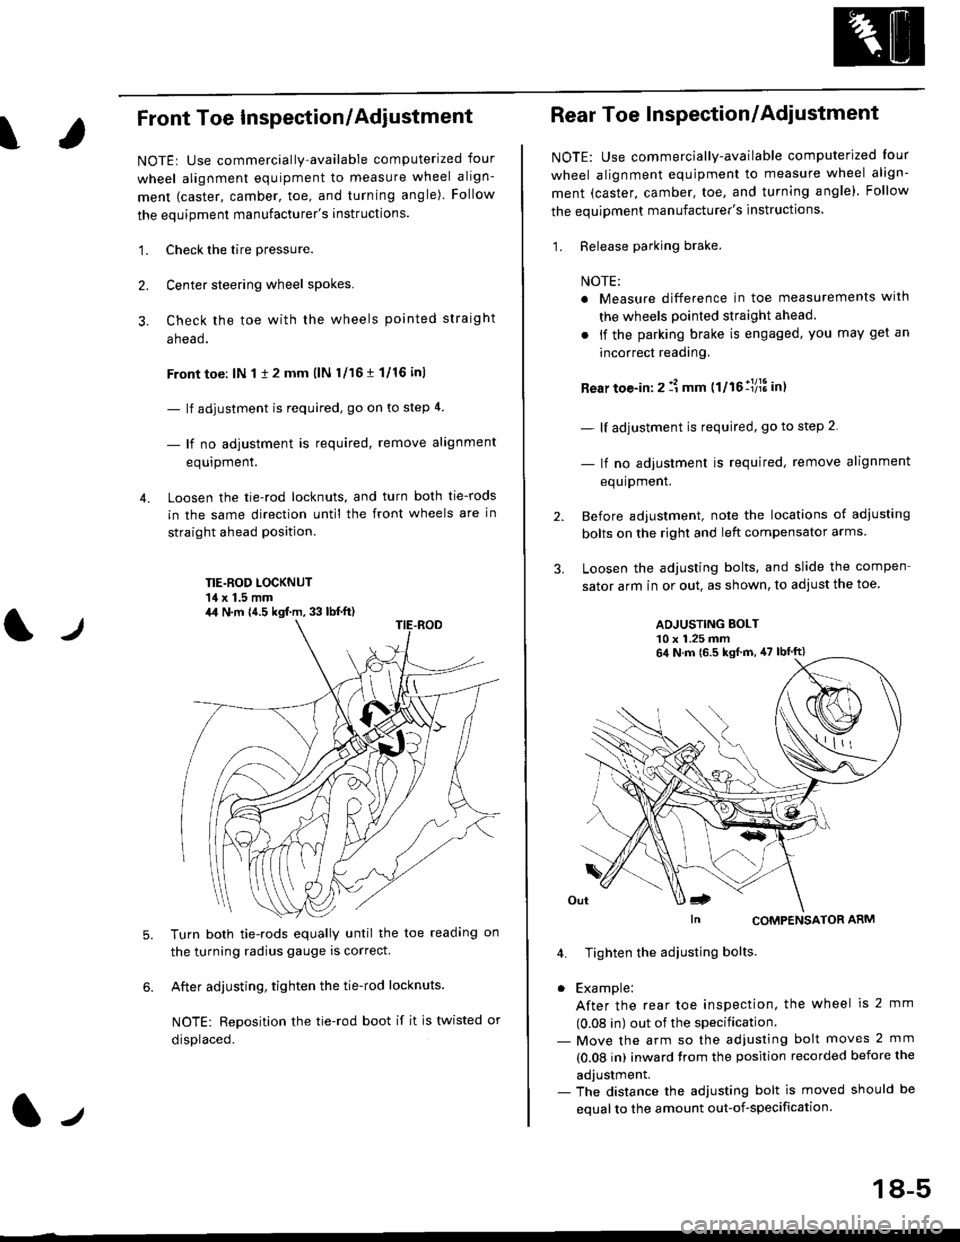 HONDA CIVIC 1998 6.G Workshop Manual ?
Front Toe Inspection/Adiustment
NOTE: Use commercially-available computerized four
wheel alignment equipment to measure wheel align-
ment (caster, camber, toe, and turning angle). Follow
the equipme